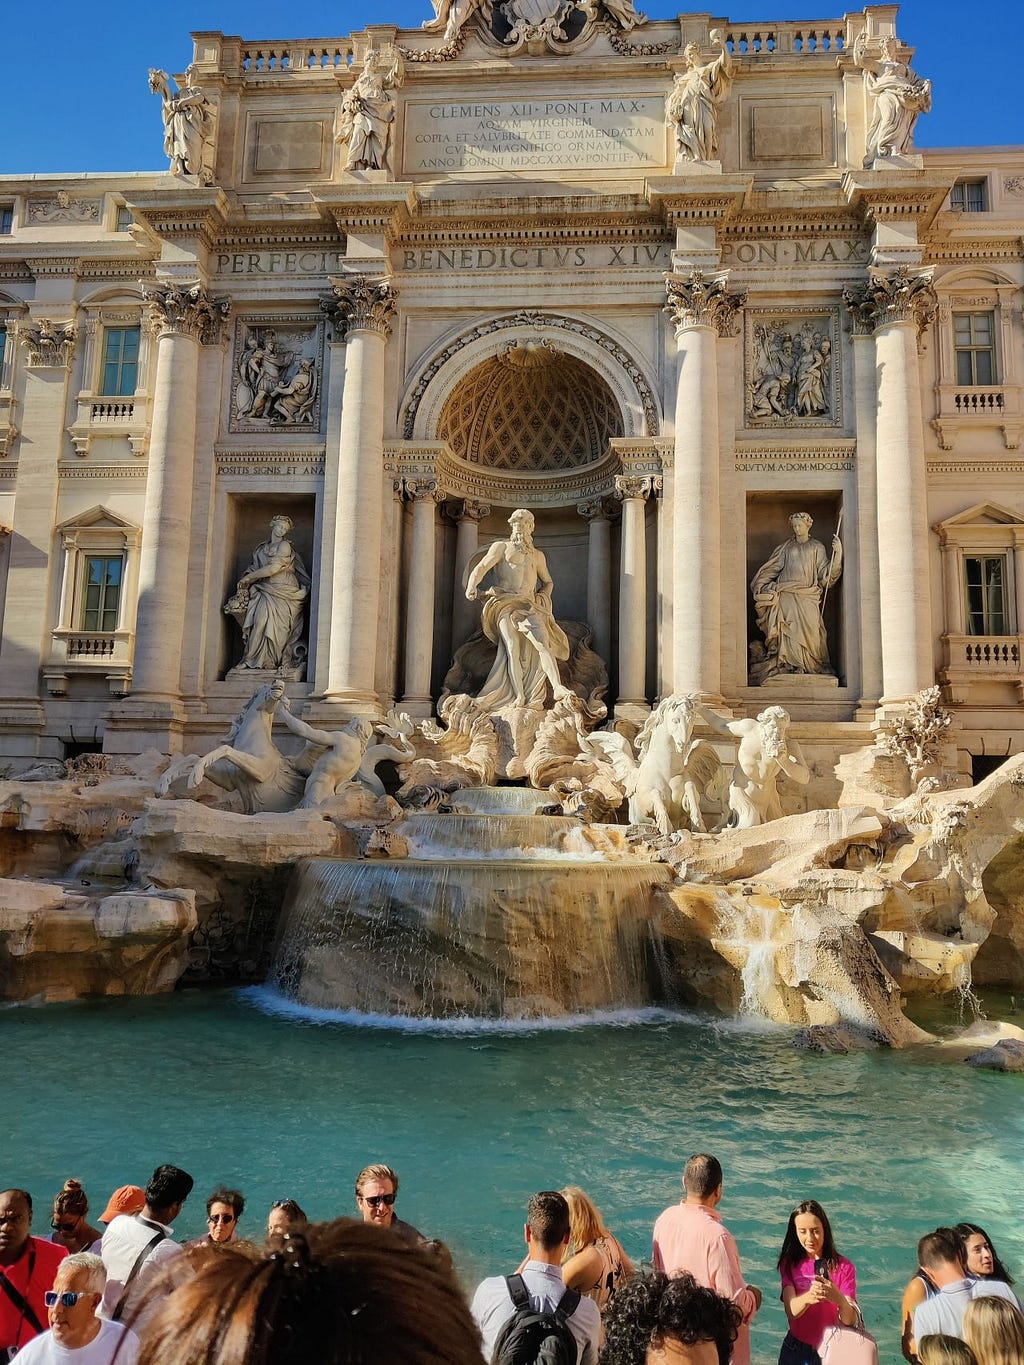 Image of the trevi fountain in rome during the day